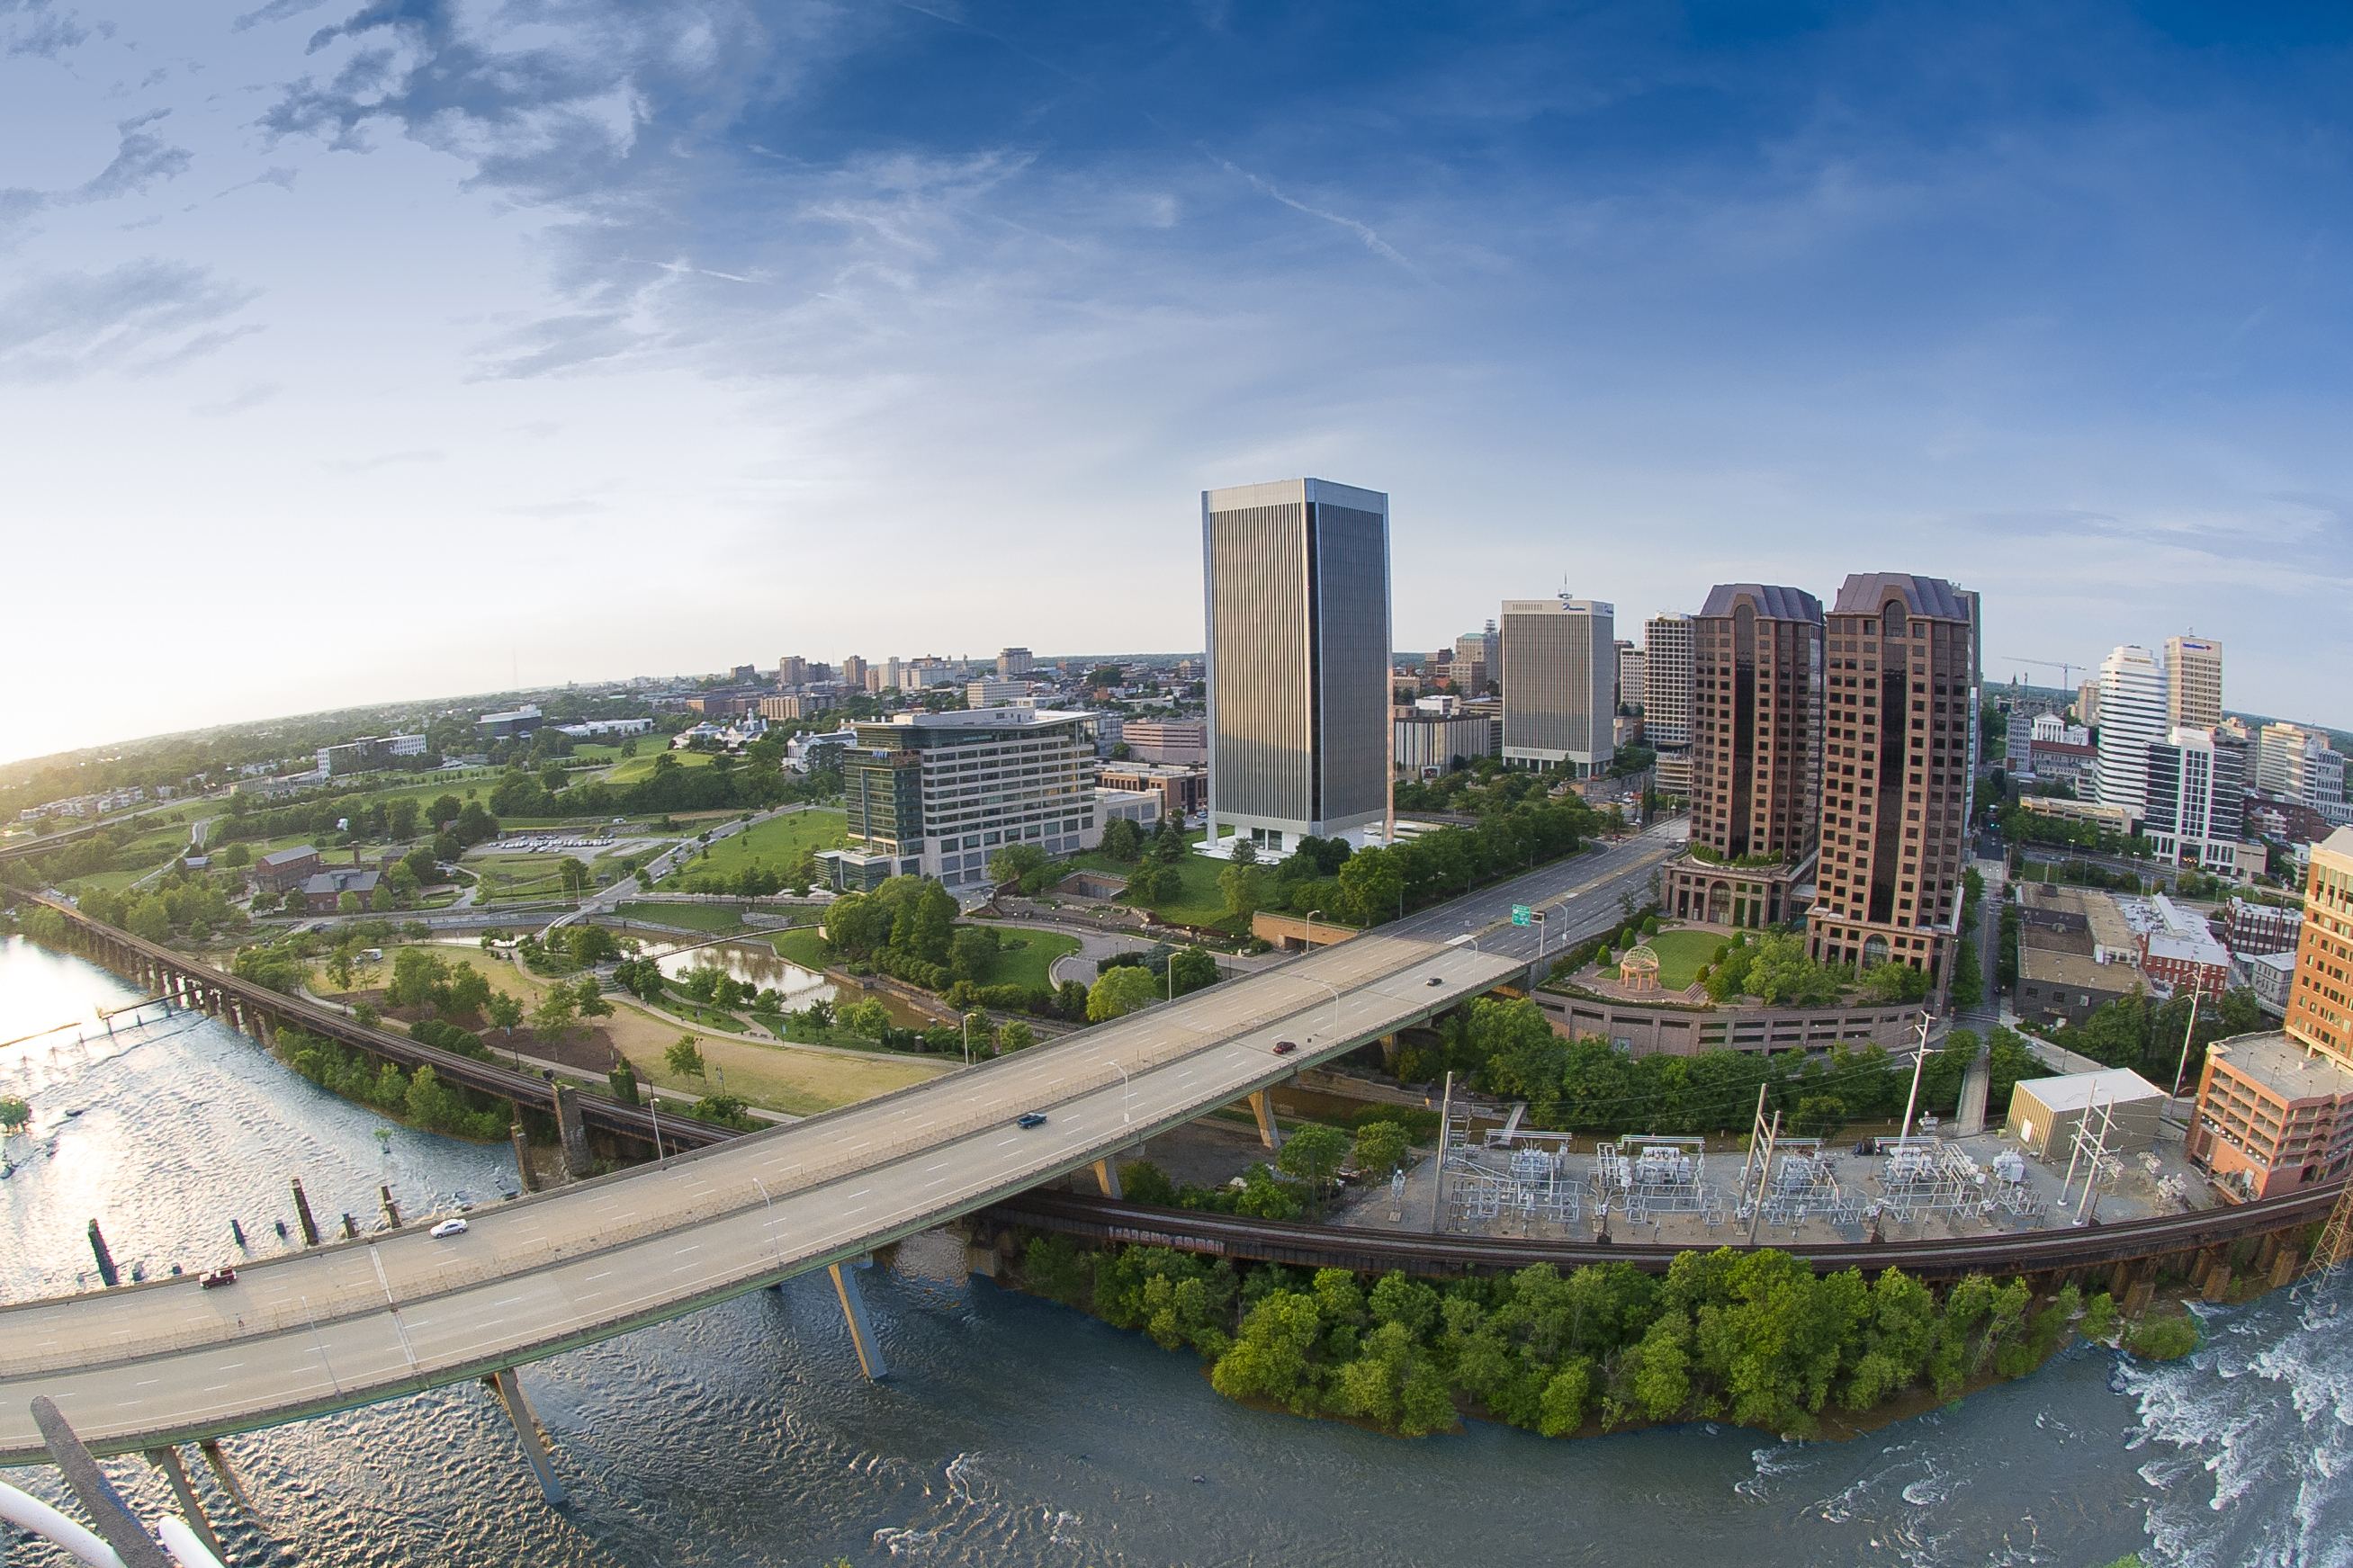 Aerial view of the city of Richmond, Virginia